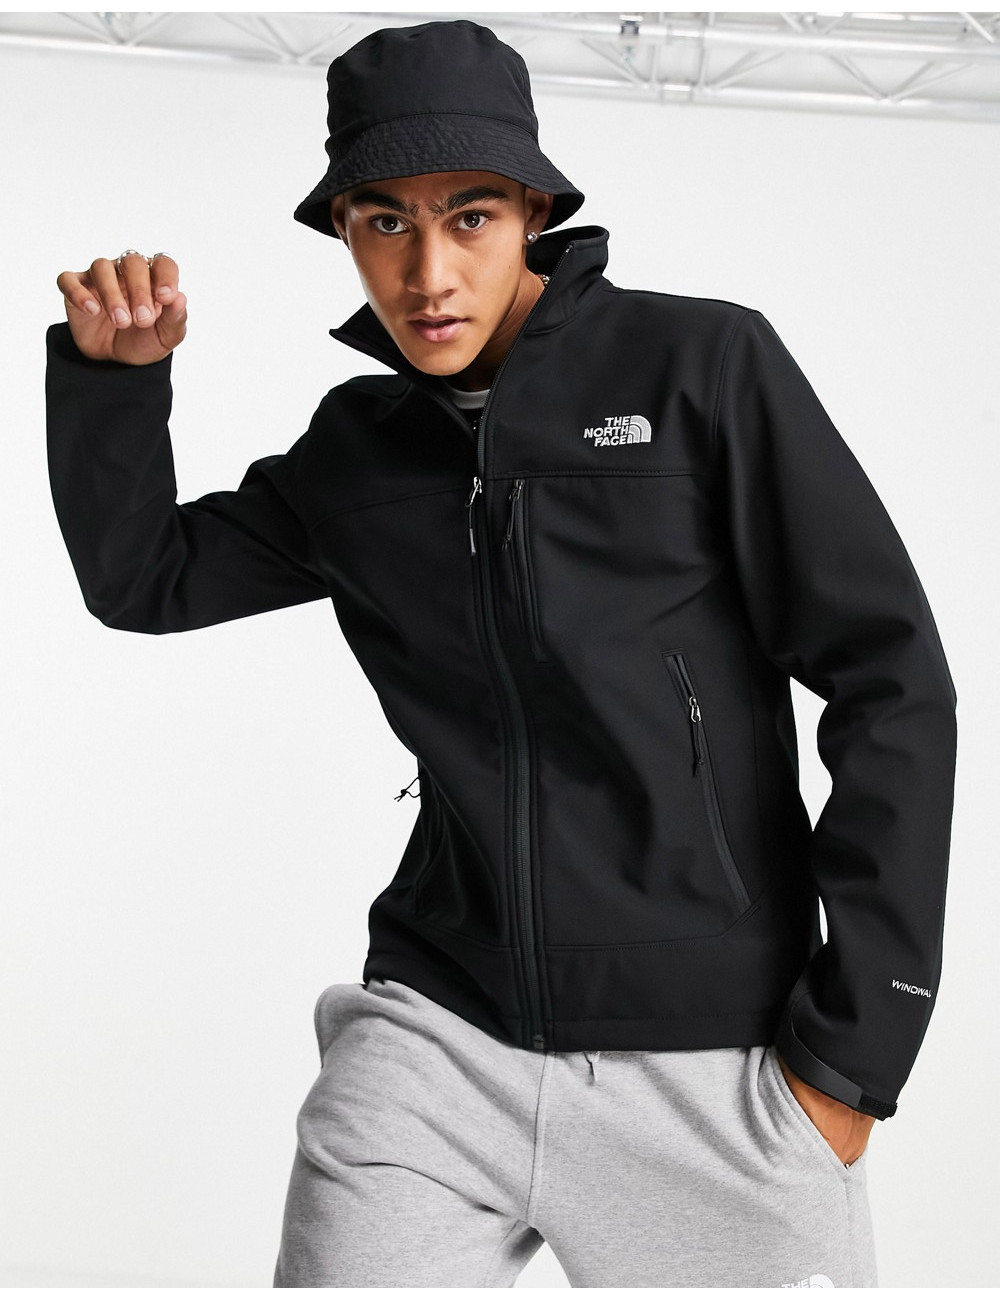 The North Face Apex Bionic...